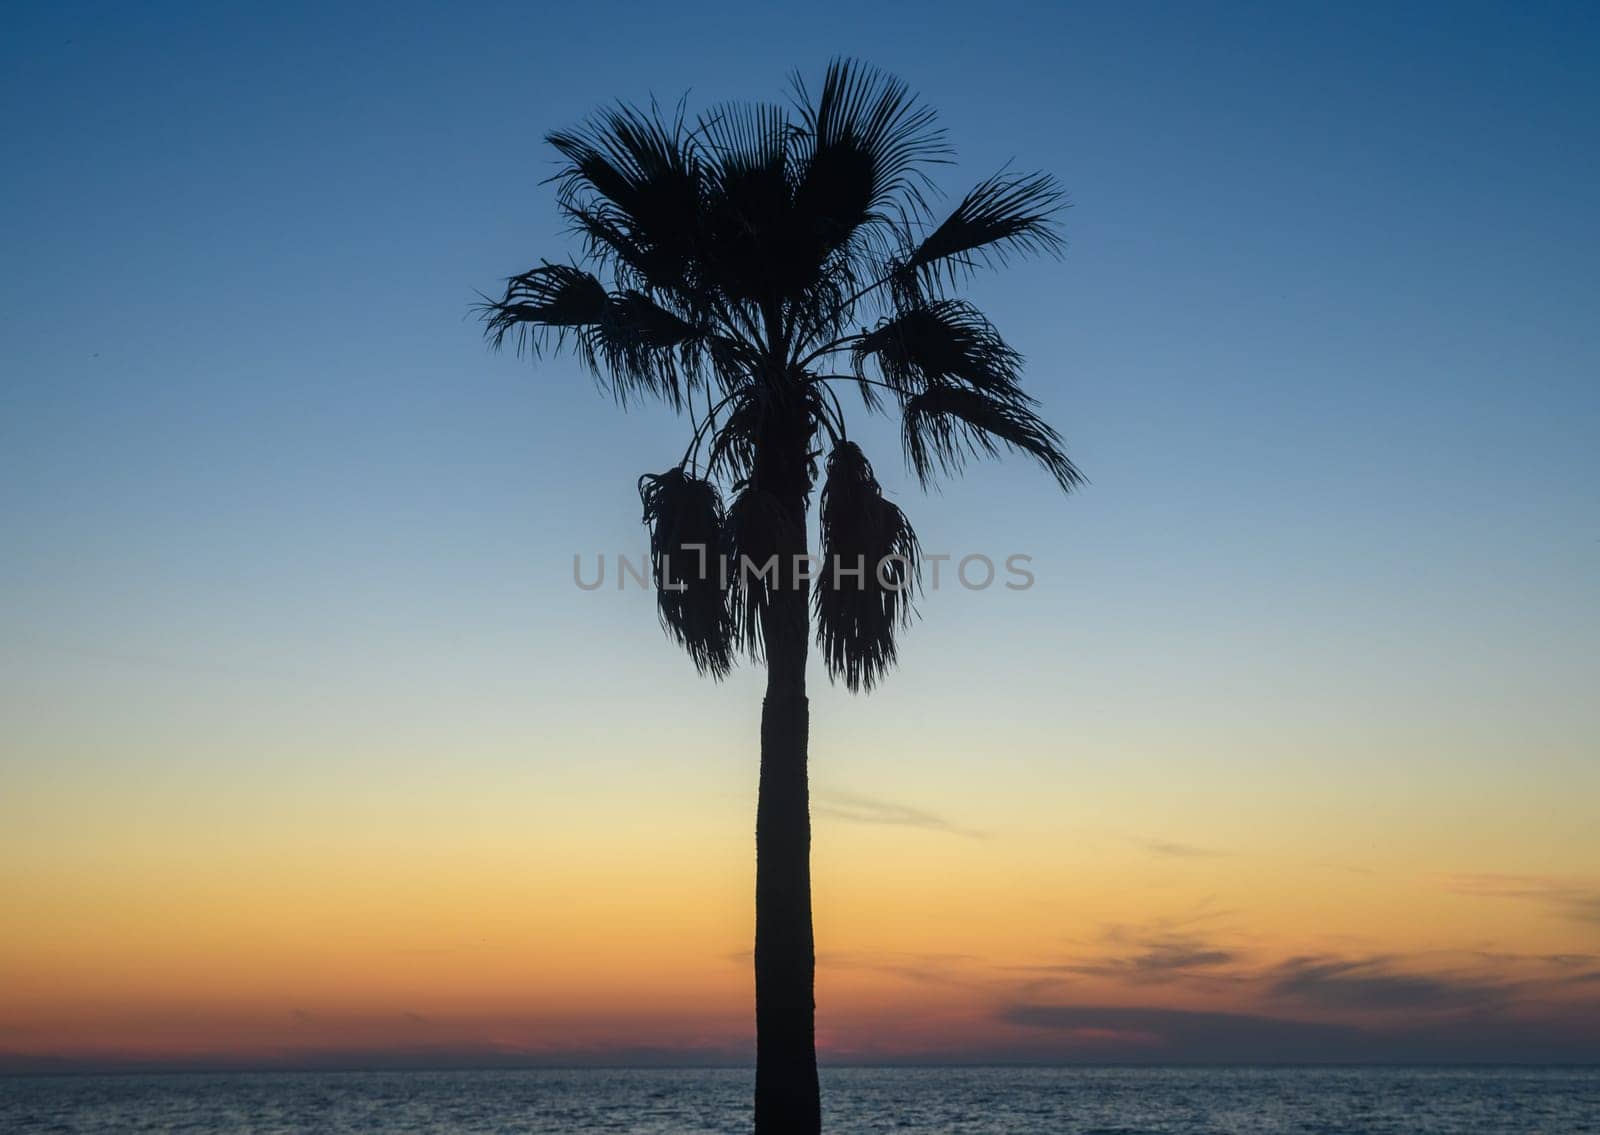 Stunning sunset with palm tree silhouettes against a colorful sky. by Mixa74